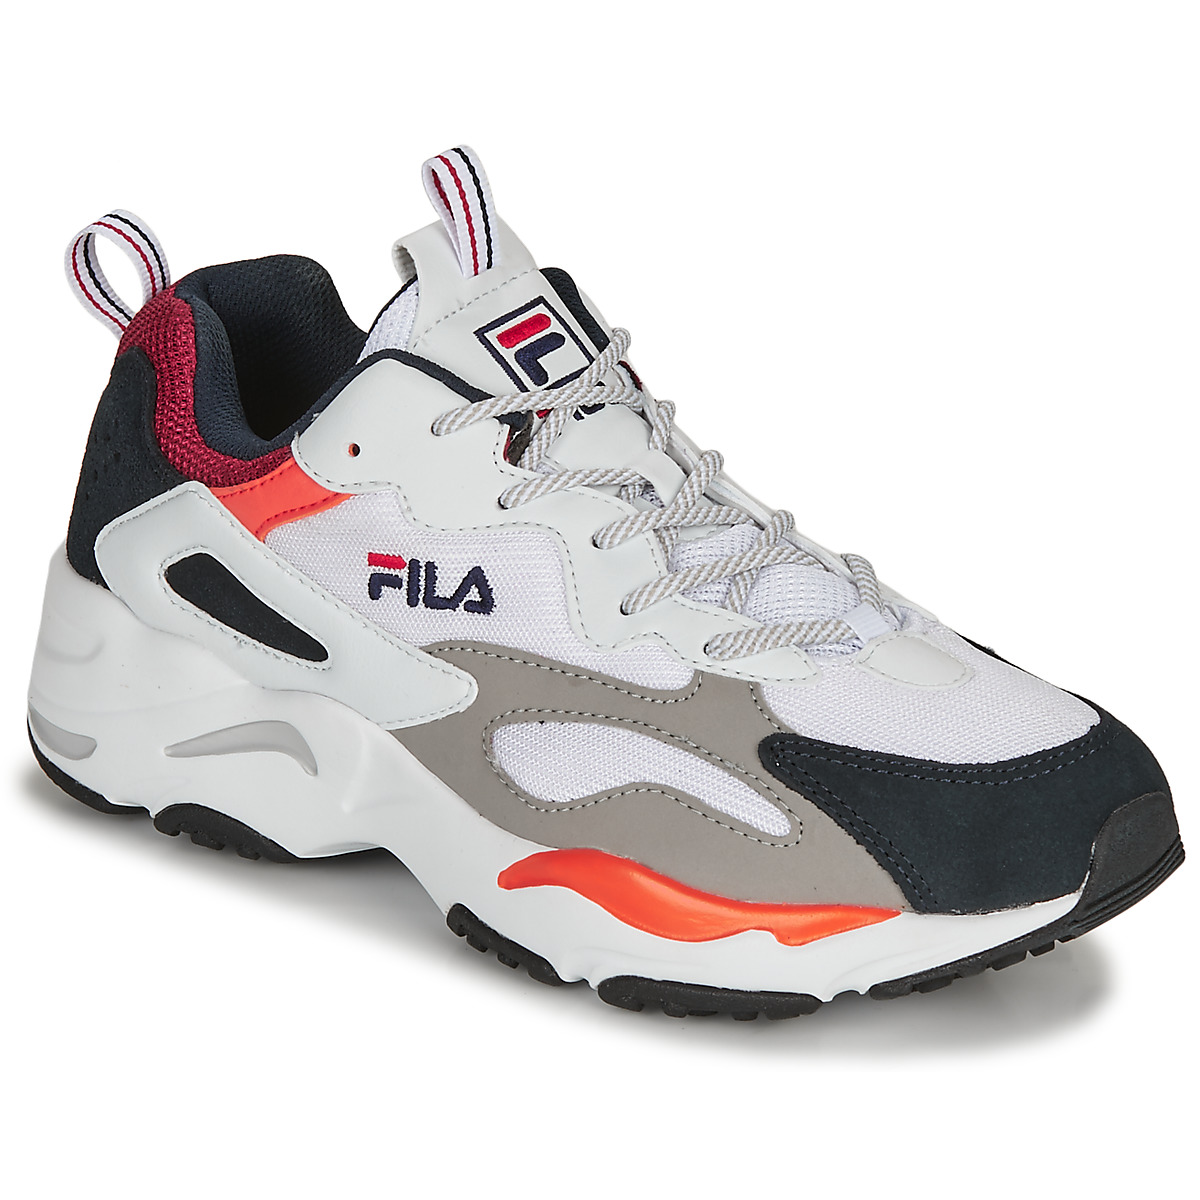 Fila Ray Tracer Blanc Outlet, SAVE 51% - aveclumiere.com